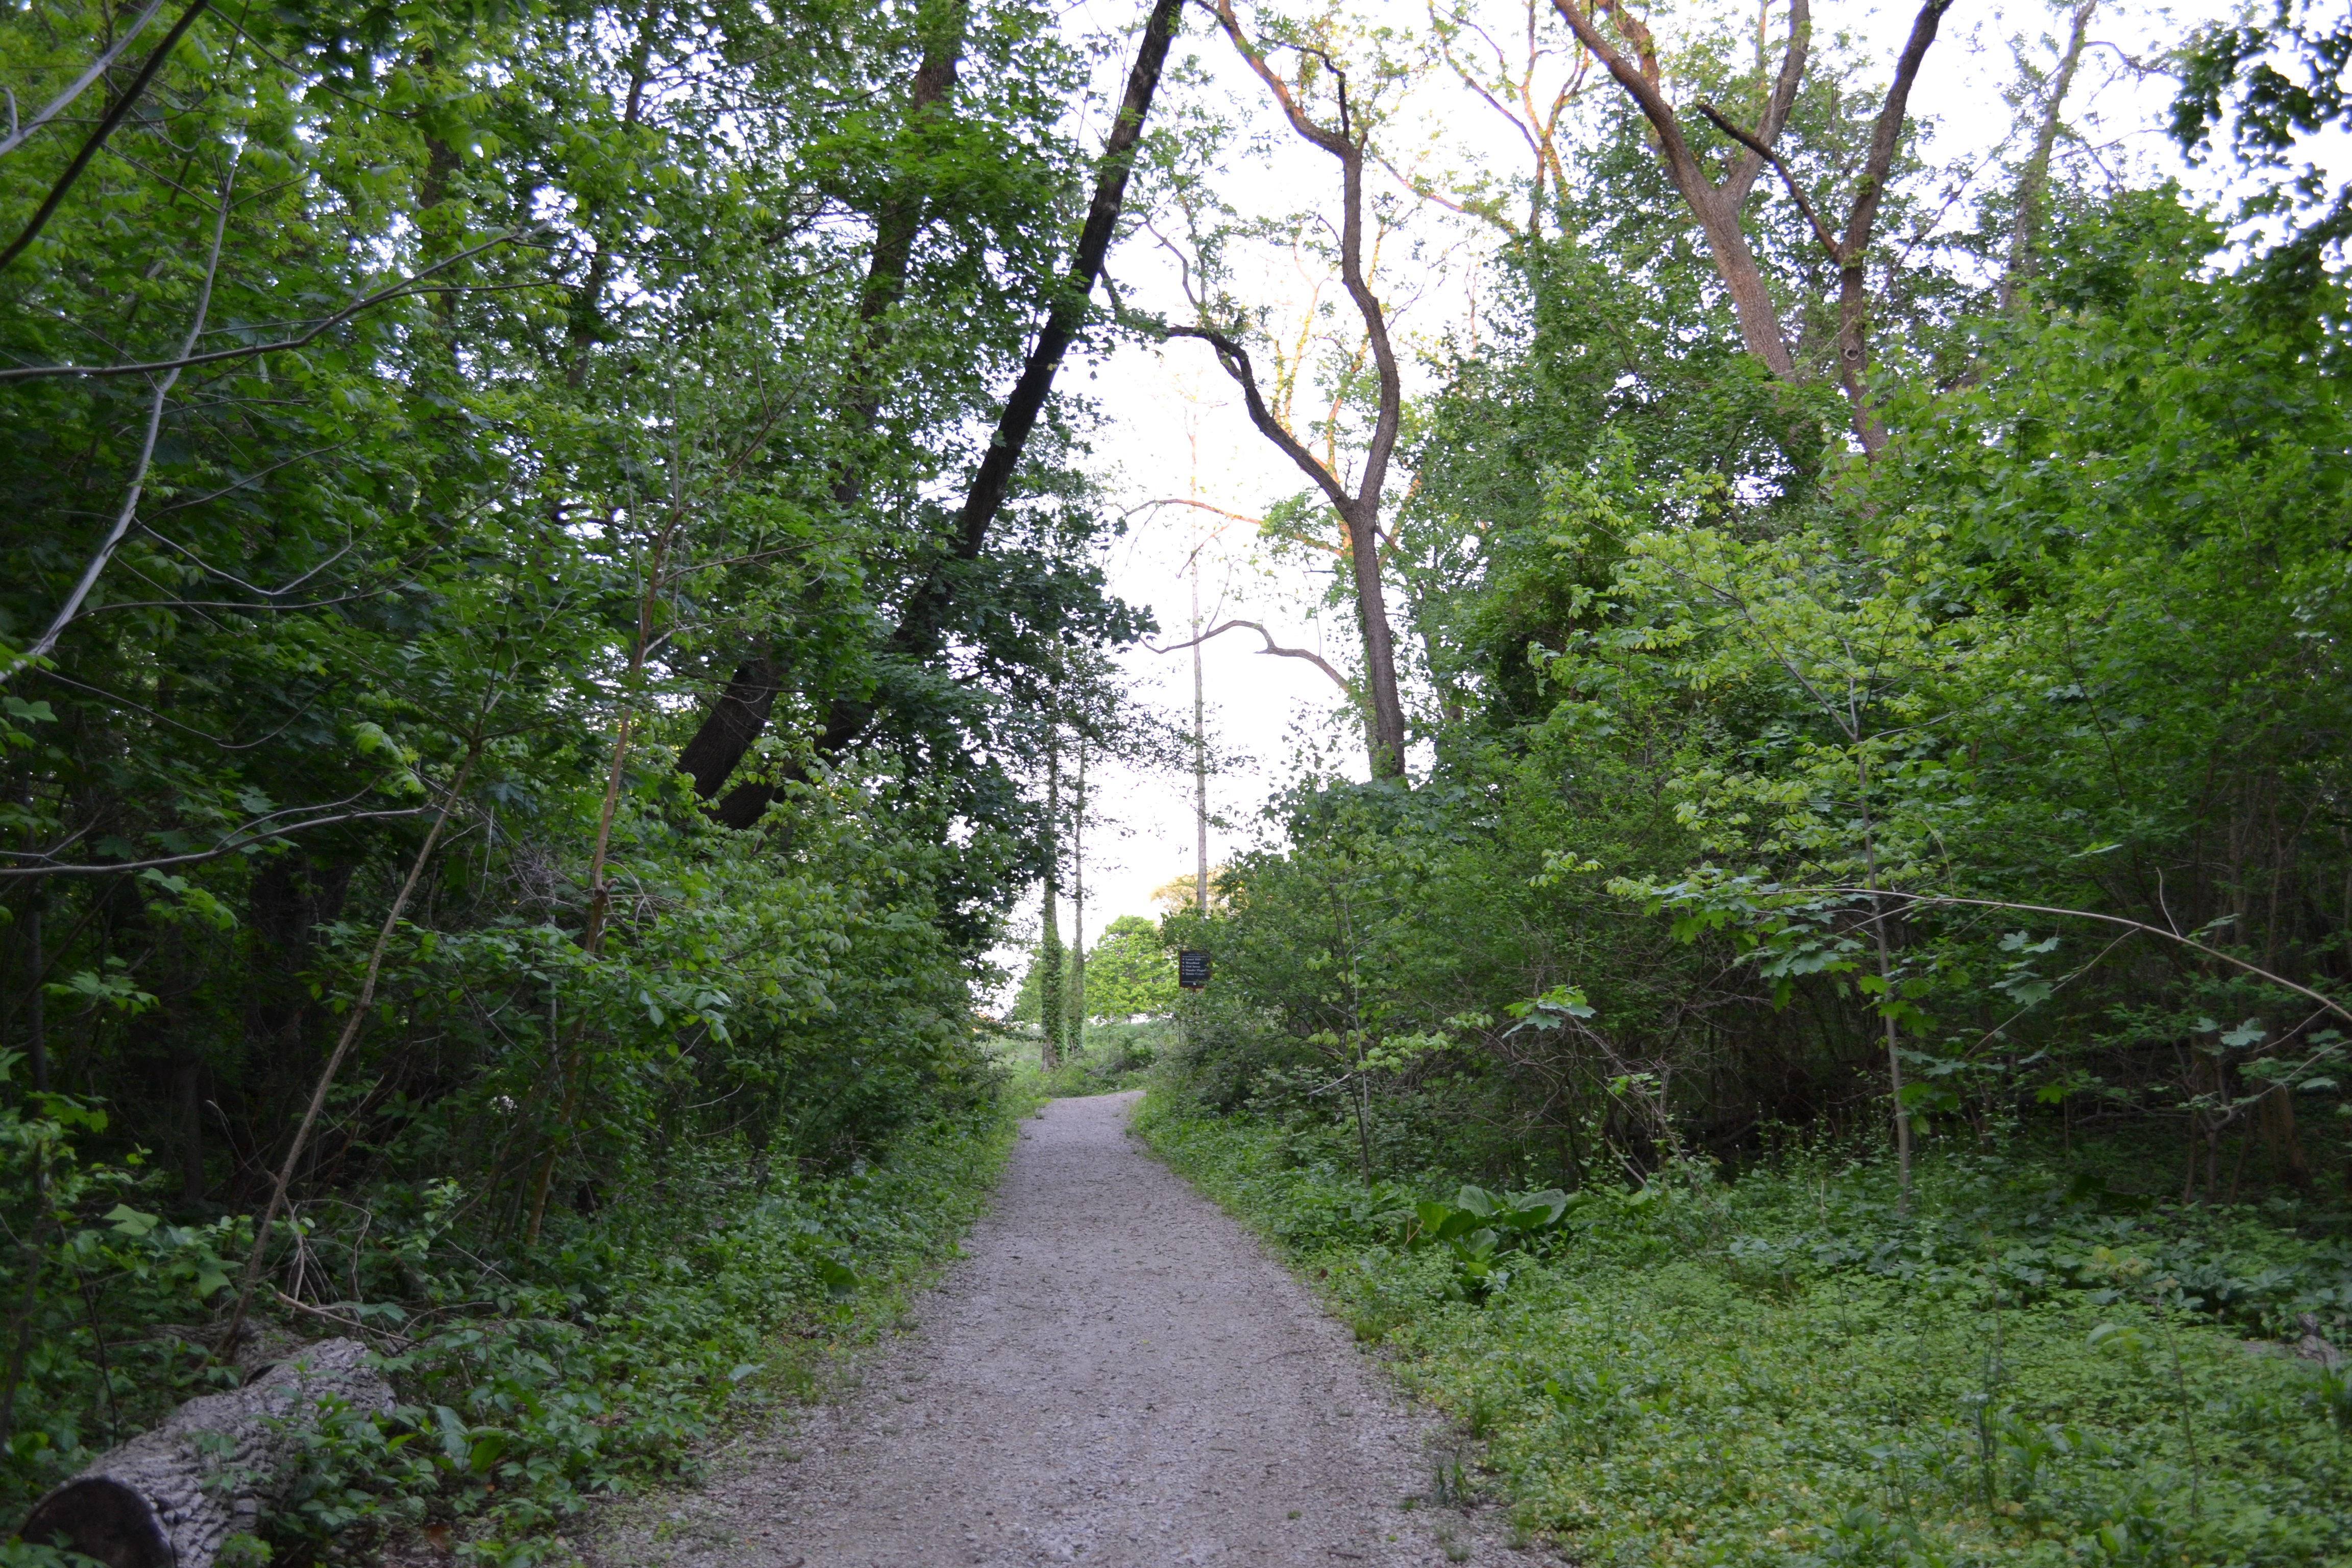 Boxers' Trail is an example of a trail that connects a neighborhood (Strawberry Mansion) to park amenities and the river